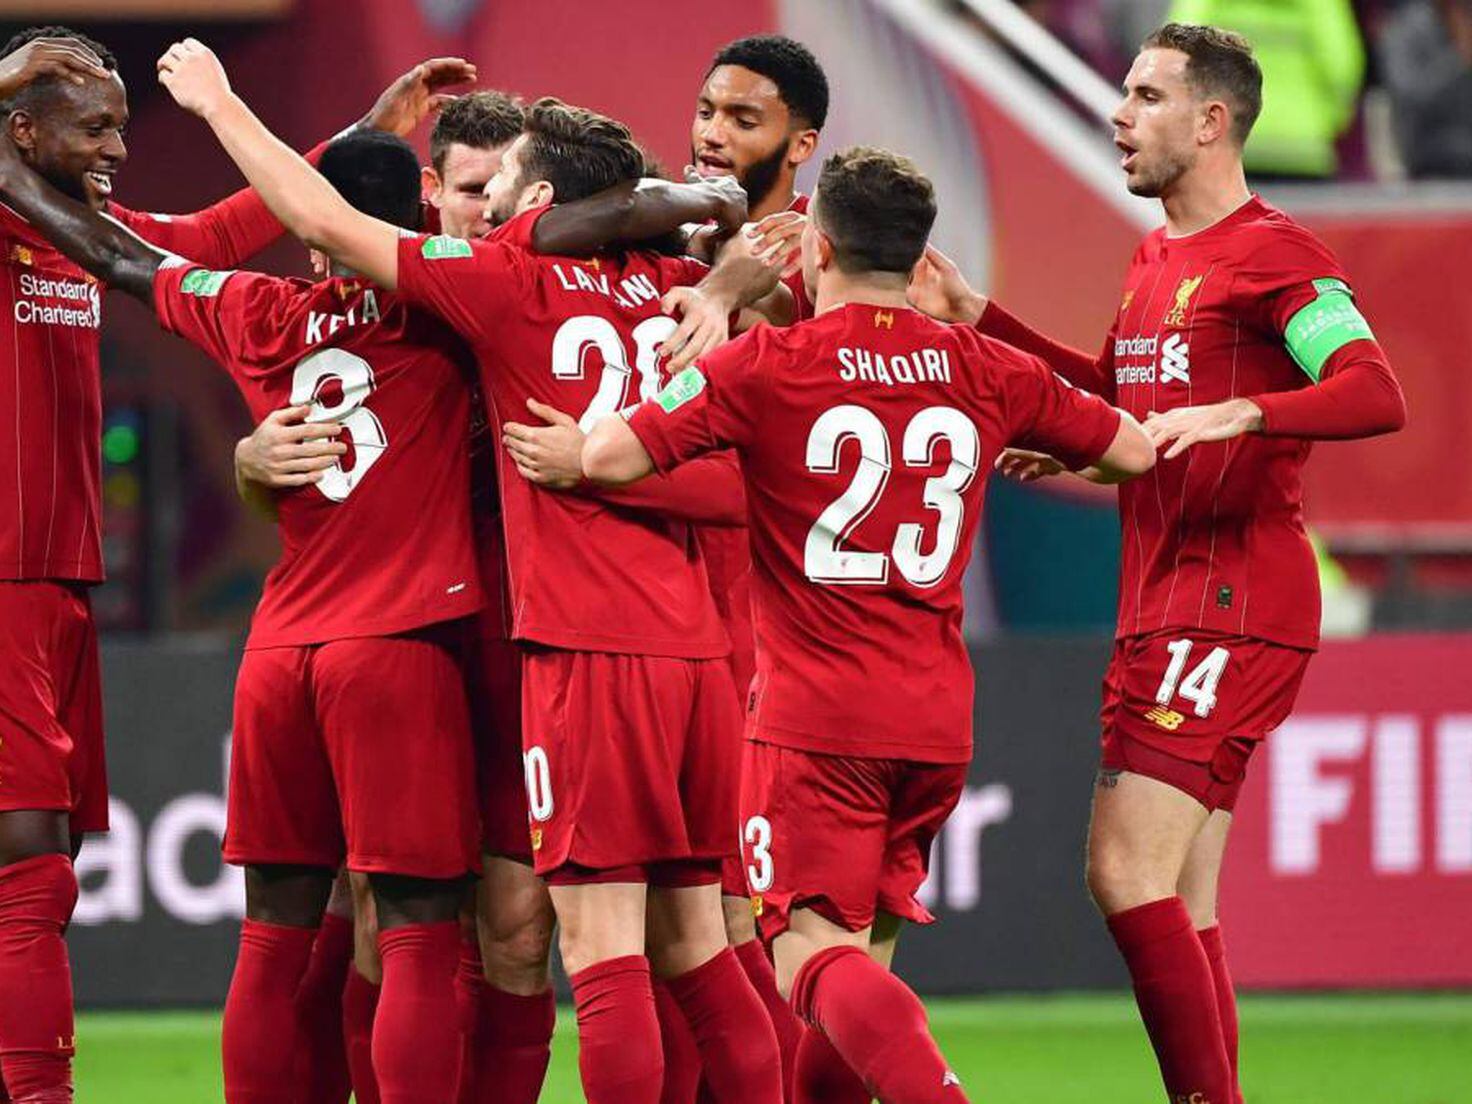 2019 FIFA Club World Cup match preview: Monterrey vs Liverpool